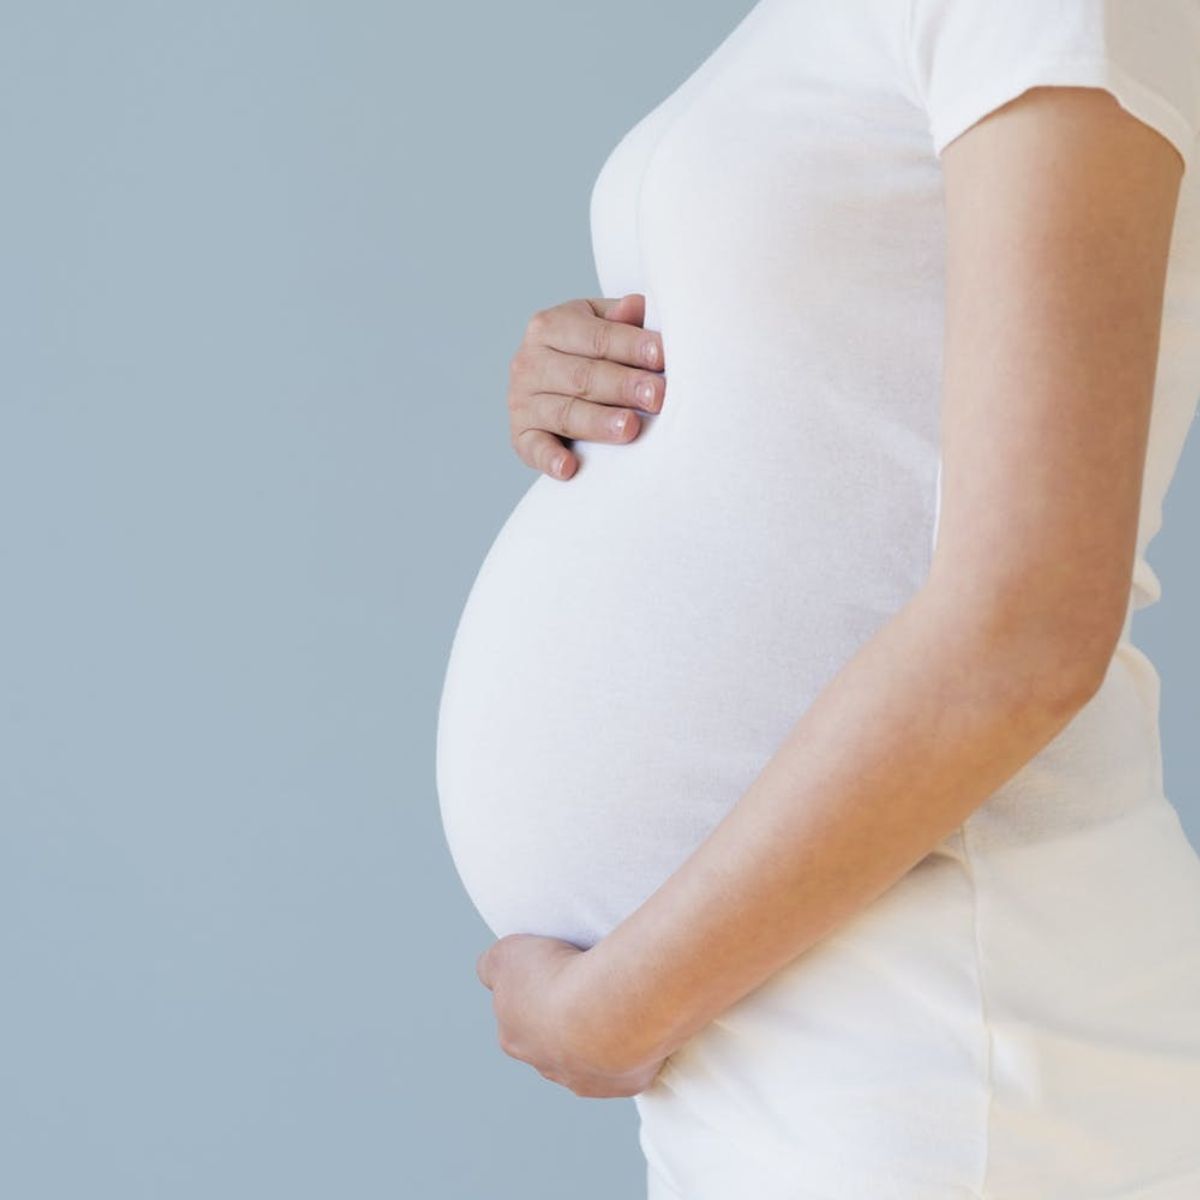 Here’s What Pregnant Women Need to Know About CBD for Anxiety and More